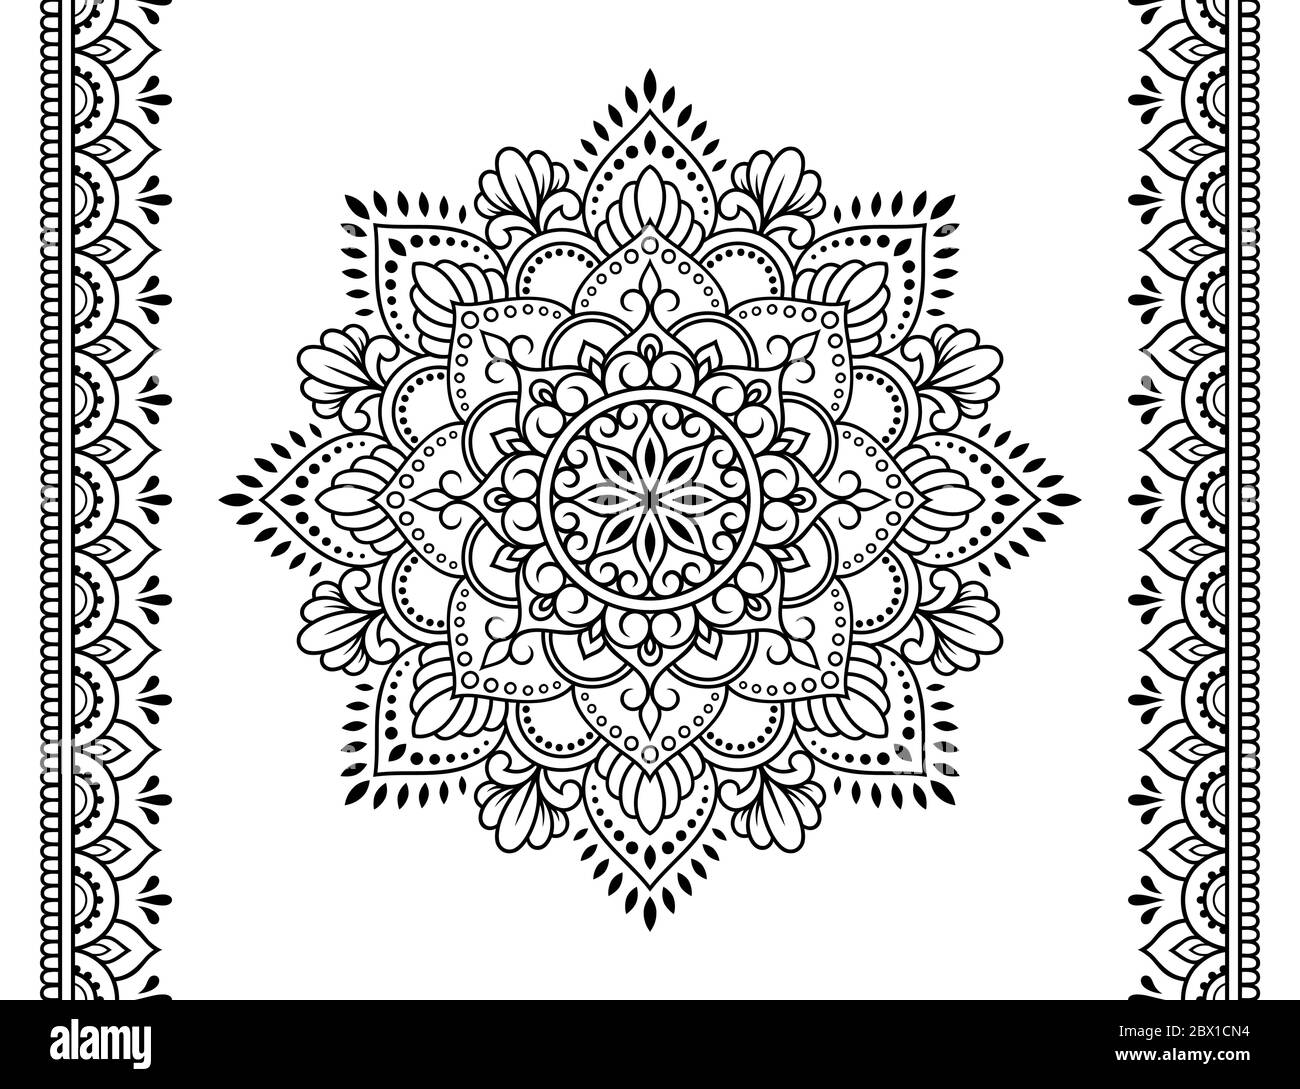 https://c8.alamy.com/comp/2BX1CN4/set-of-mandala-pattern-and-seamless-border-for-henna-drawing-and-tattoo-decoration-in-ethnic-oriental-mehndi-indian-style-doodle-ornament-in-black-2BX1CN4.jpg